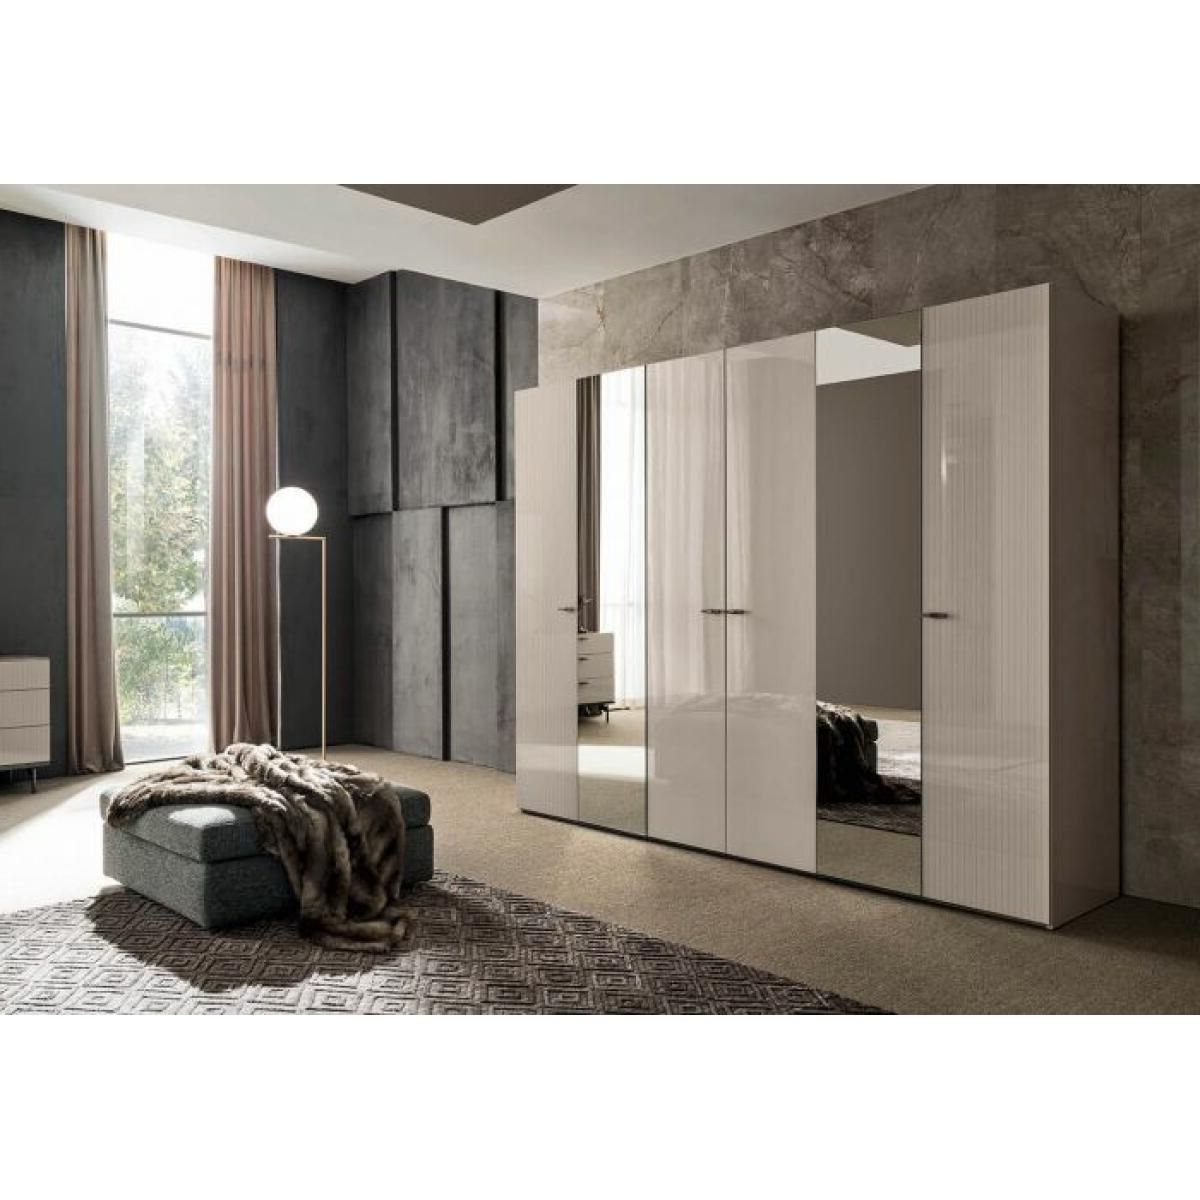 Claire 6 Door Mirrored Wardrobe – Bova Contemporary Furniture – Dallas,  Texas Modern Furniture Store With Mirrored Wardrobes With Drawers (Gallery 20 of 20)